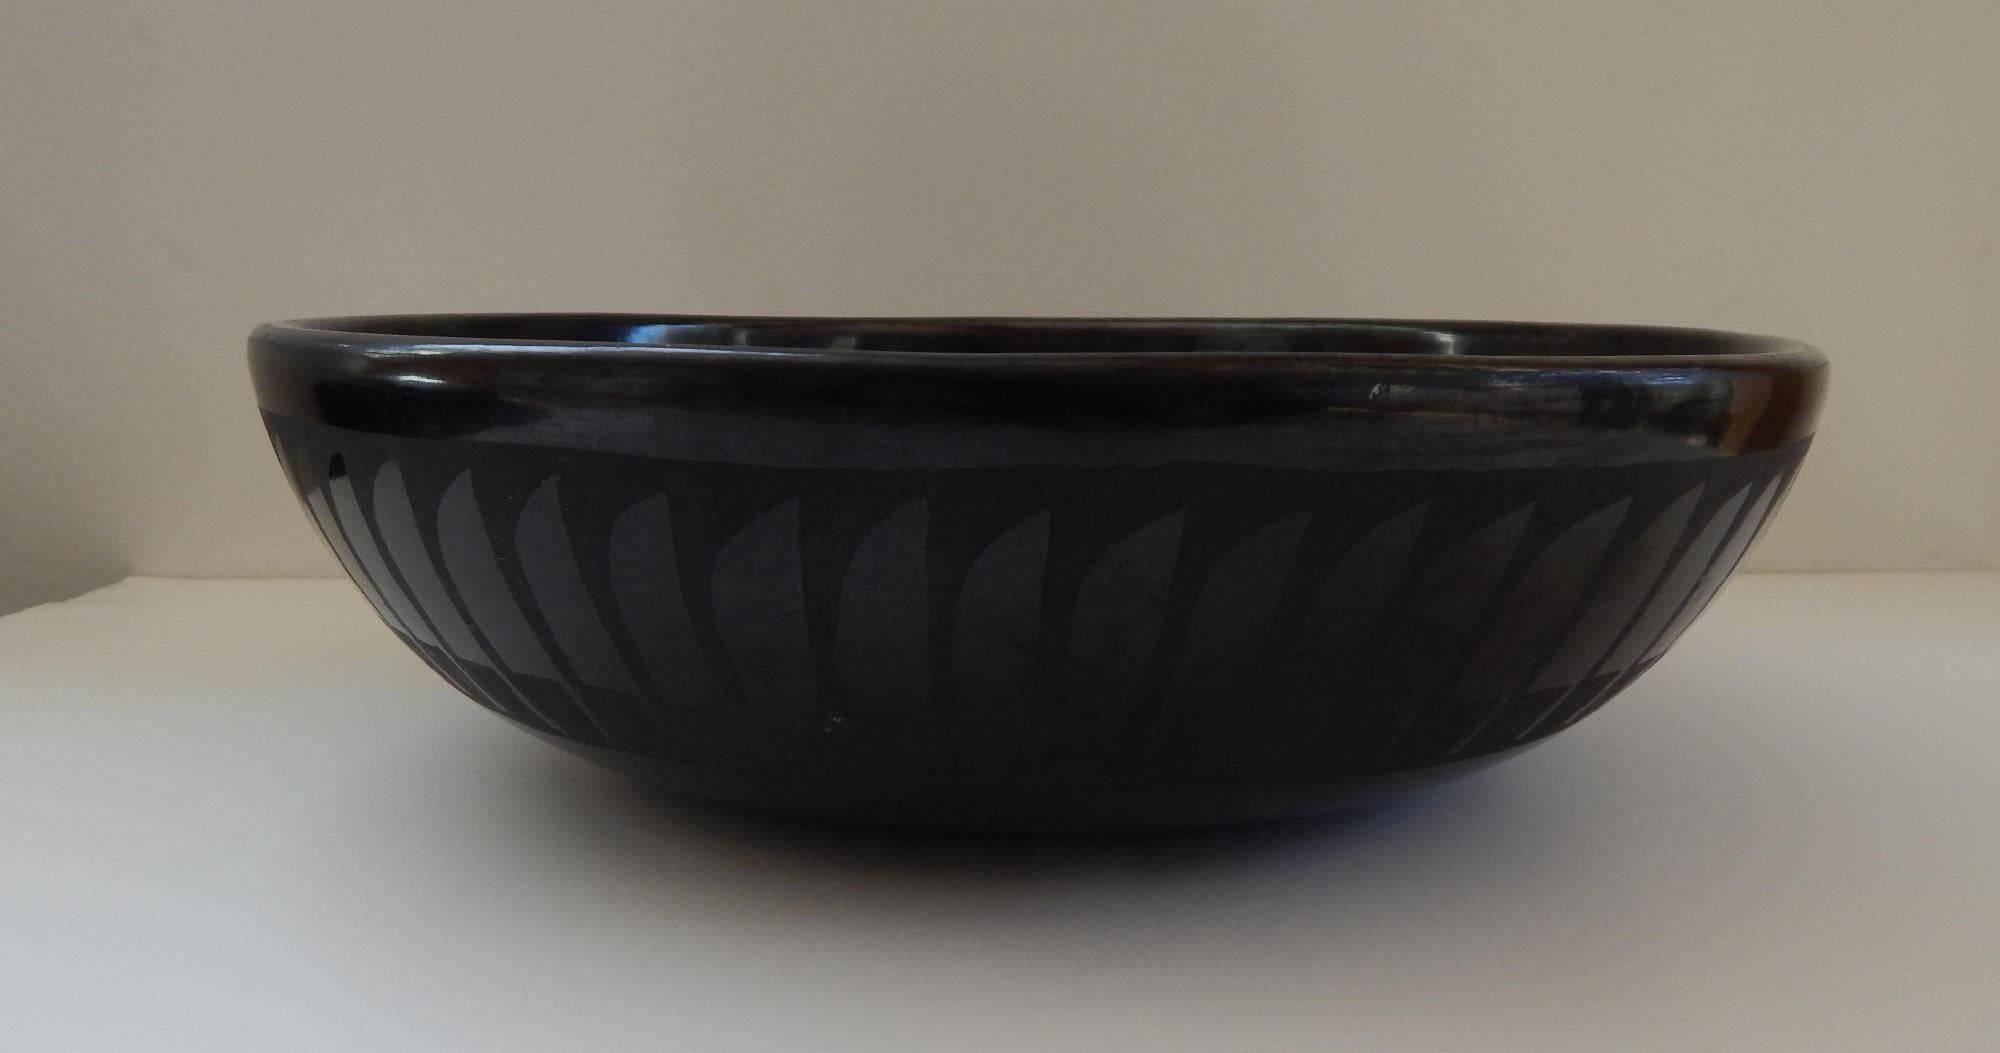 Large blackware bowl decorated with stylized feather design.
Signed “Marie & Santana” on the bottom.
One small flake on the rim 11.25